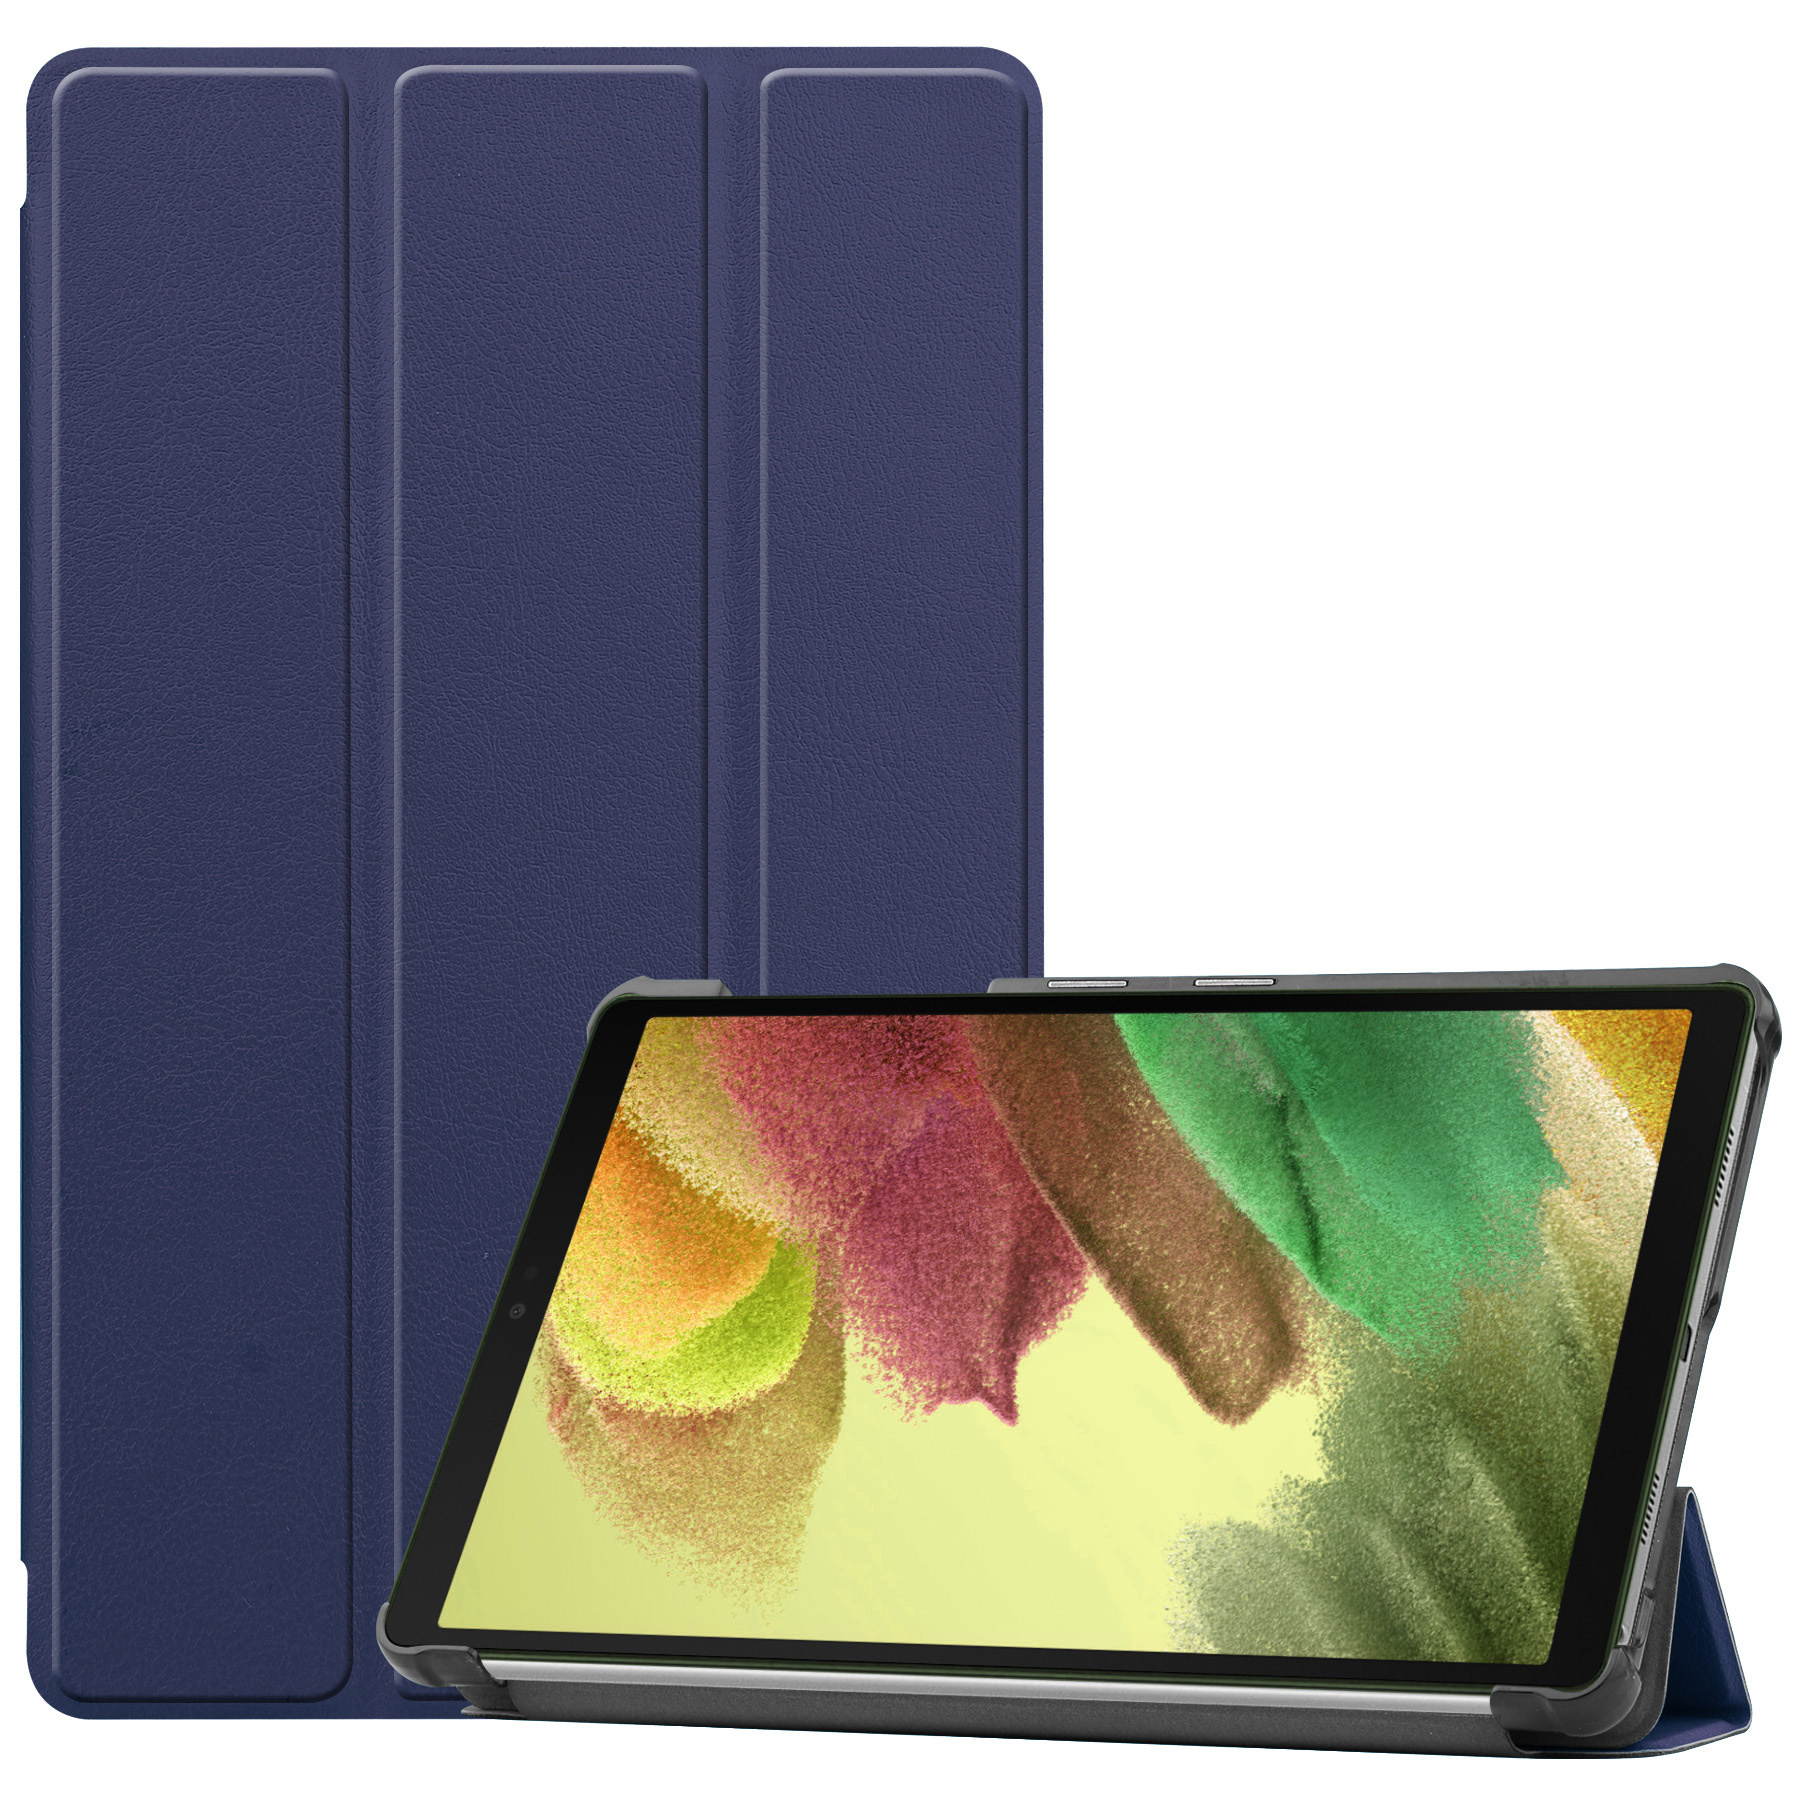 Nomfy Samsung Tab S6 Lite Hoesje Book Case Hoes - Samsung Galaxy Tab S6 Lite Hoes Hardcover Hoesje - Donker Blauw